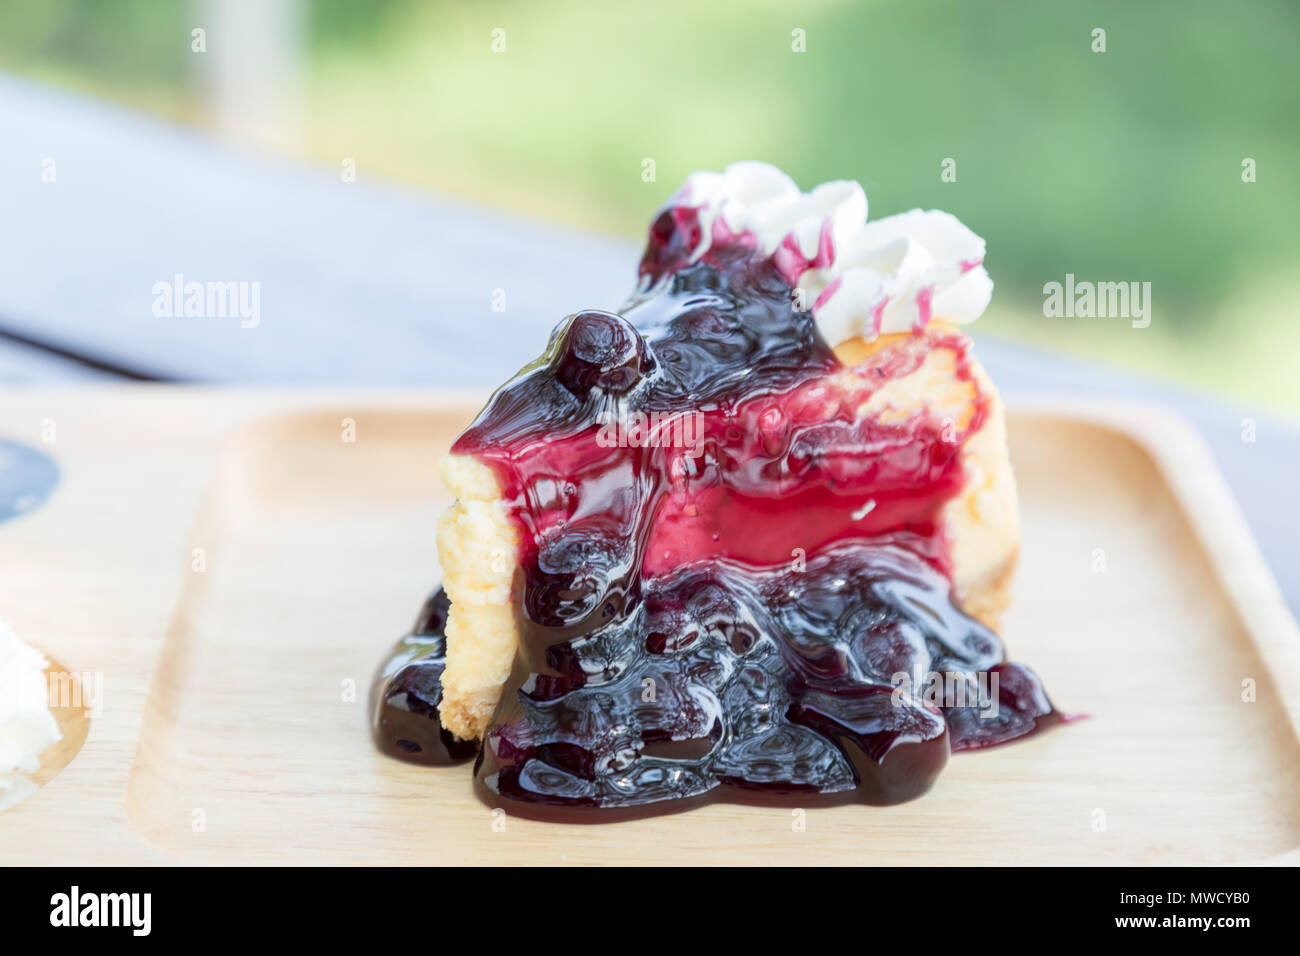 Blueberry cheesecake with cream on wooden plate on wood table at restaurant. Stock Photo